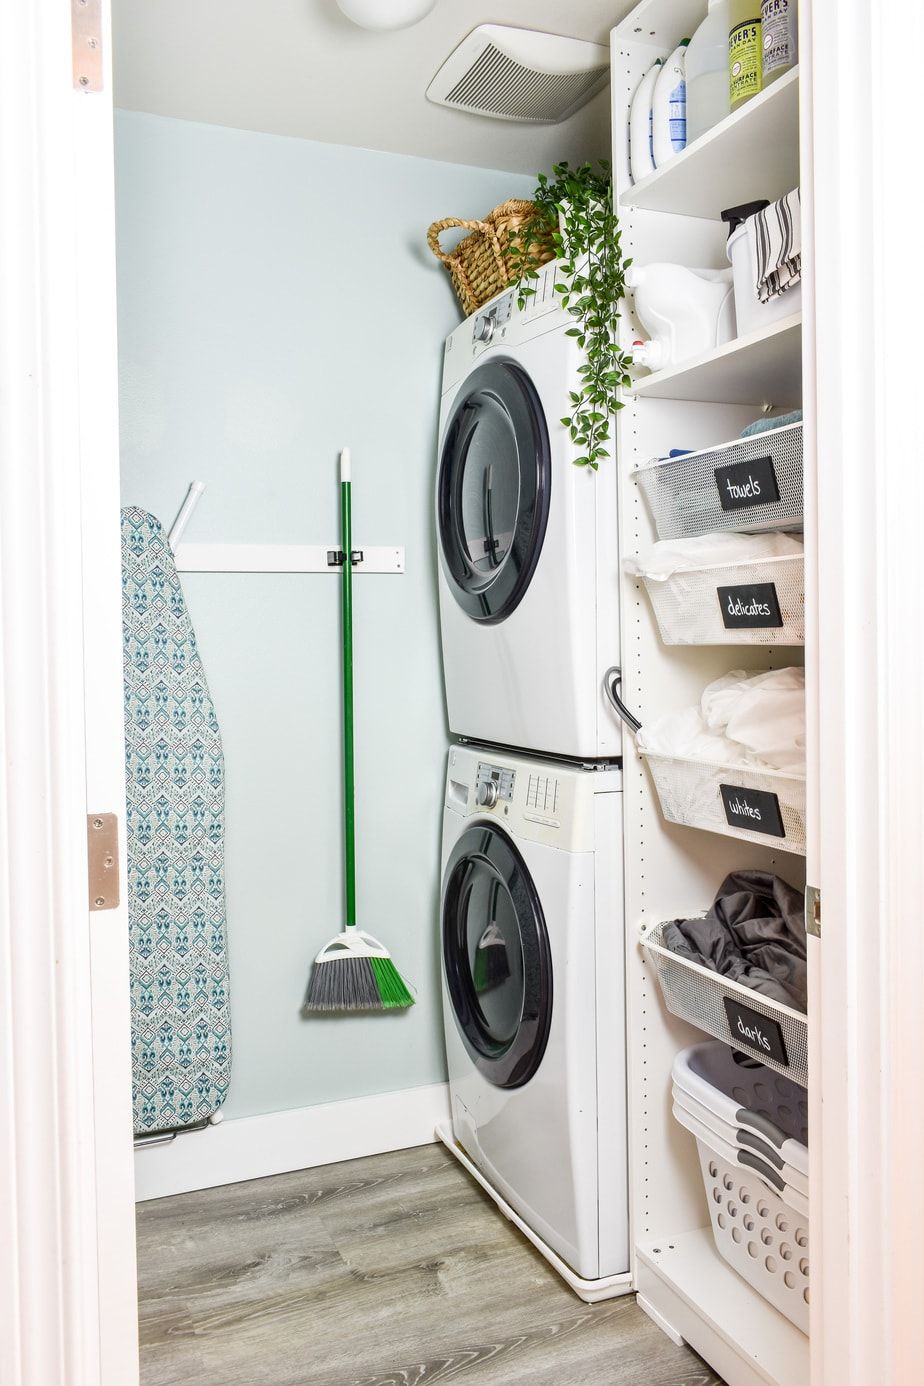 27 Clever Laundry Room Ideas How To, Laundry Shelving Ideas